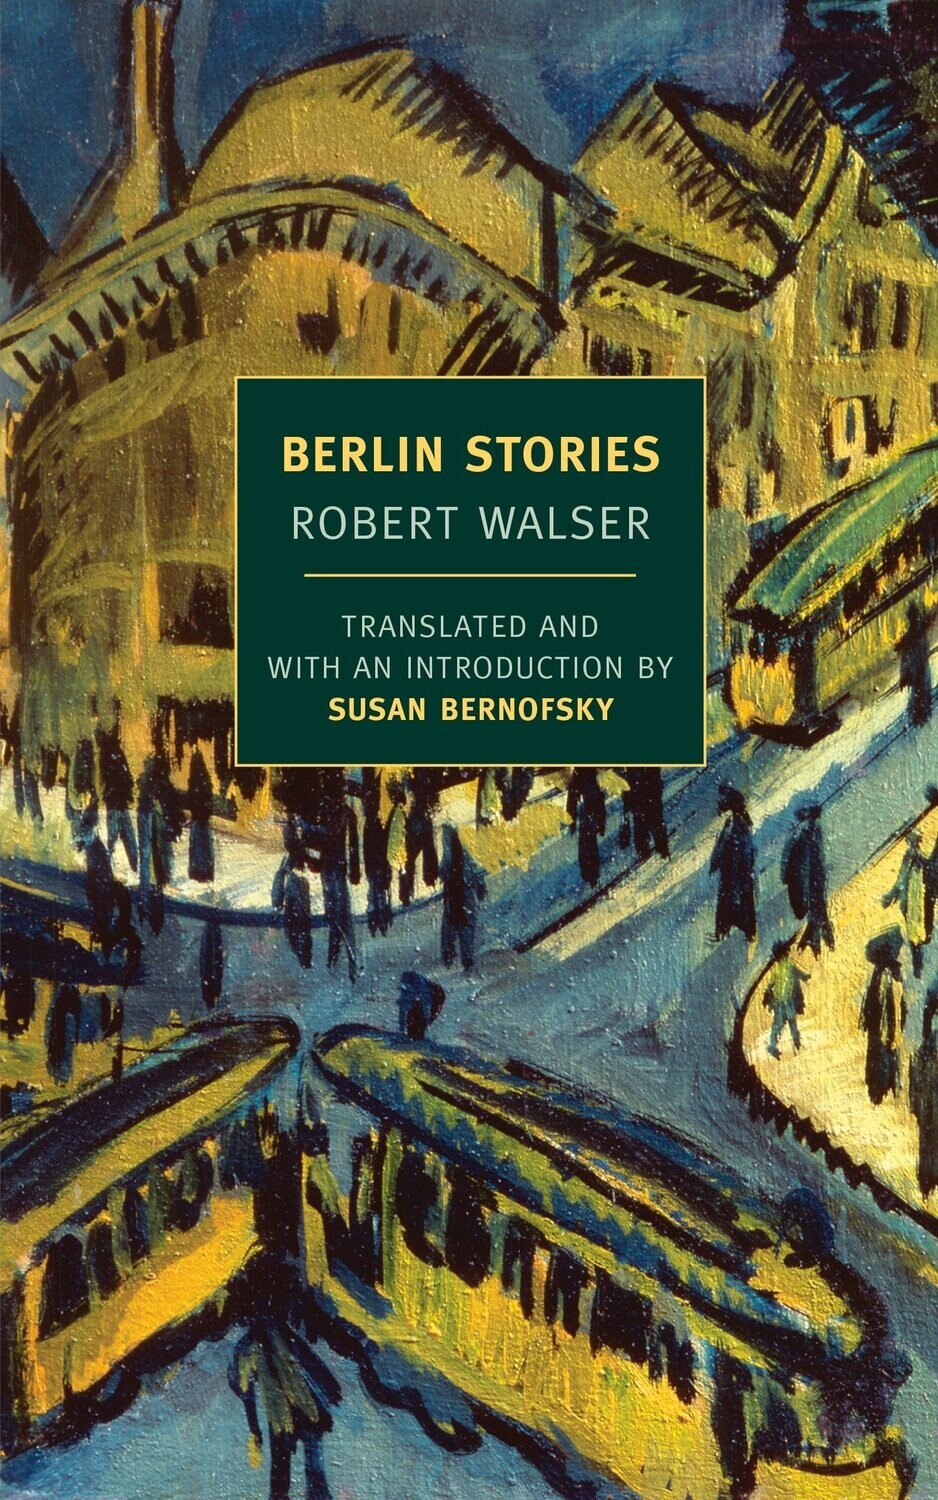 Berlin Stories By Robert Walser, Translated and with an Introduction by Susan Bernofsky